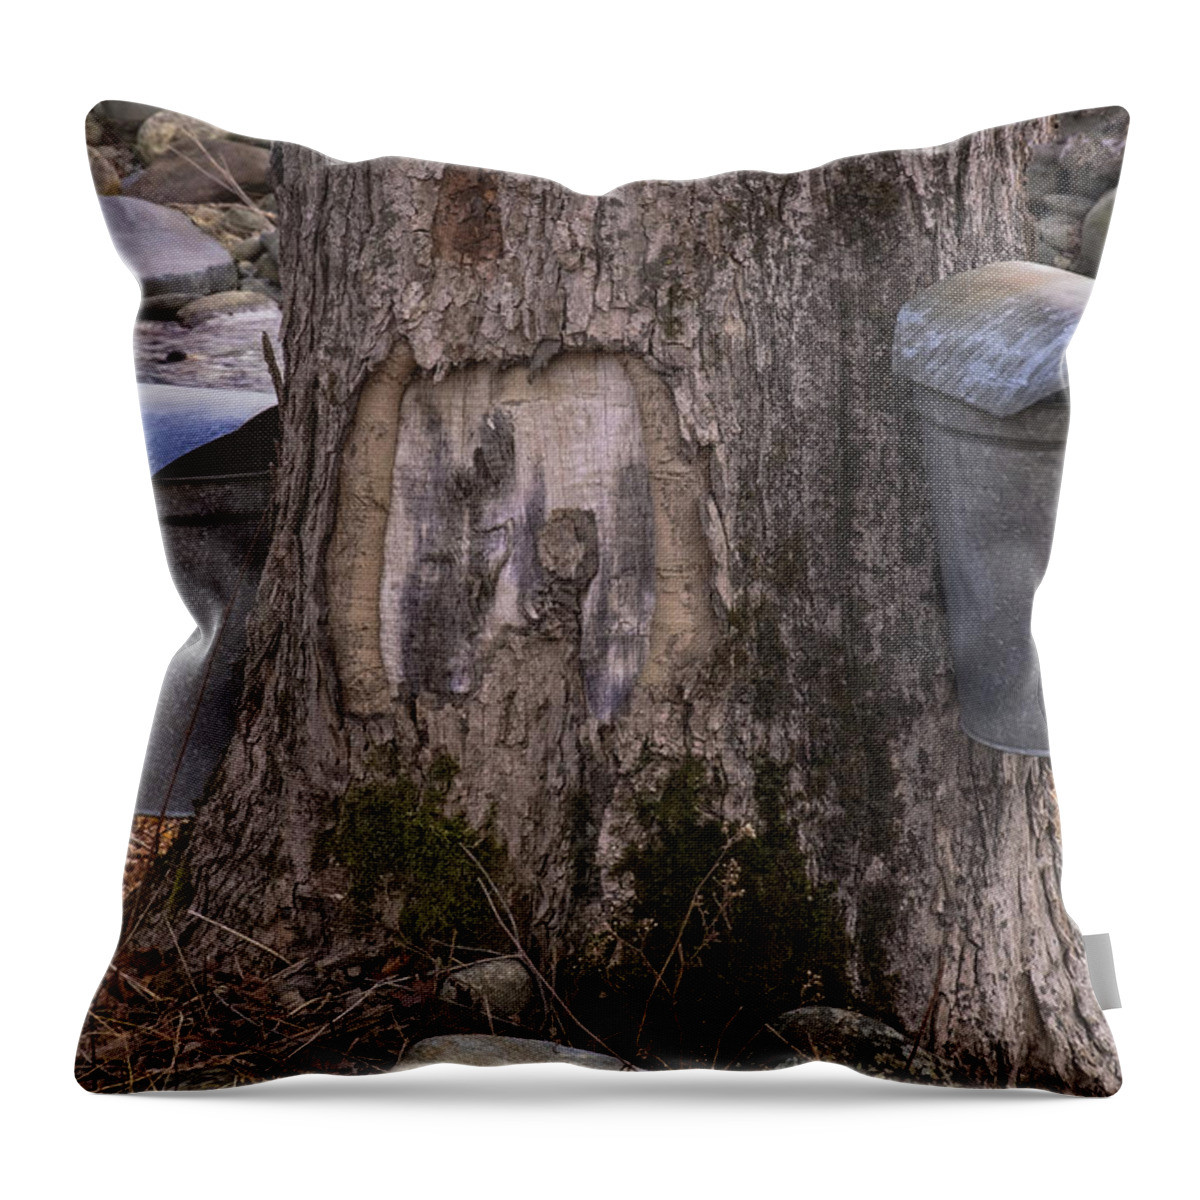 Maple Trees Throw Pillow featuring the photograph Two Syrup Buckets by Tom Singleton